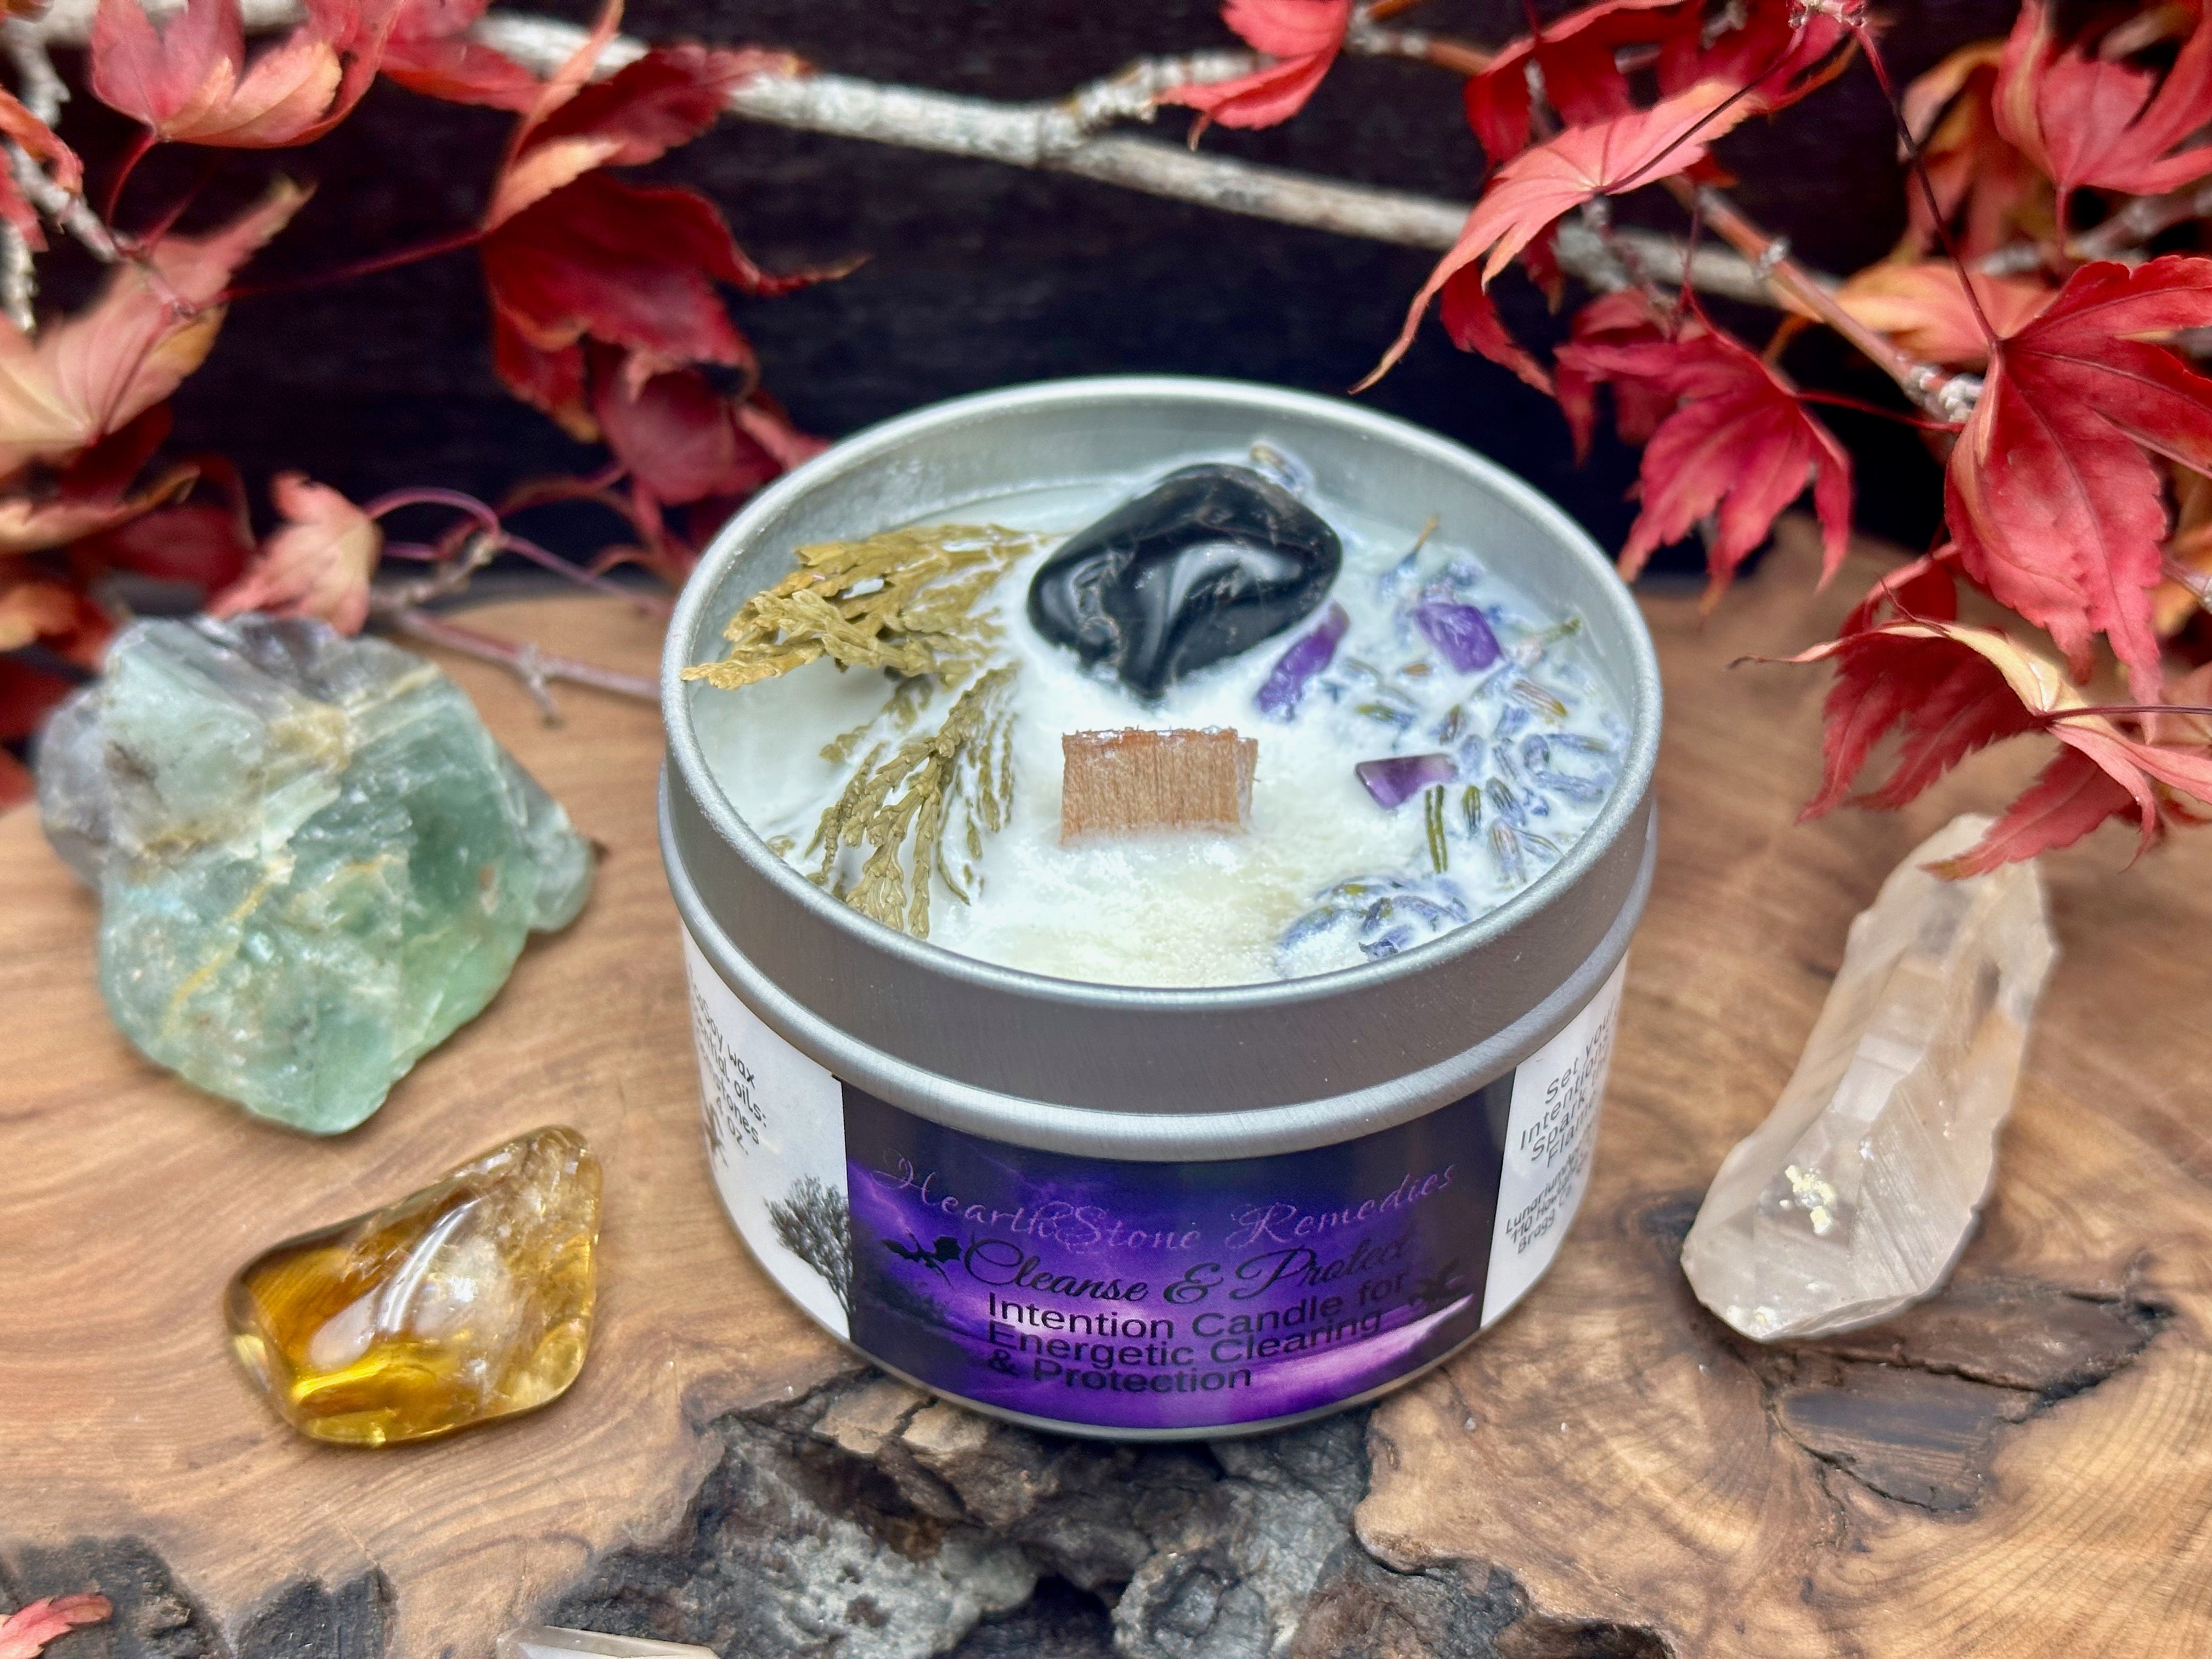 Cleanse & Protect Intention Candle